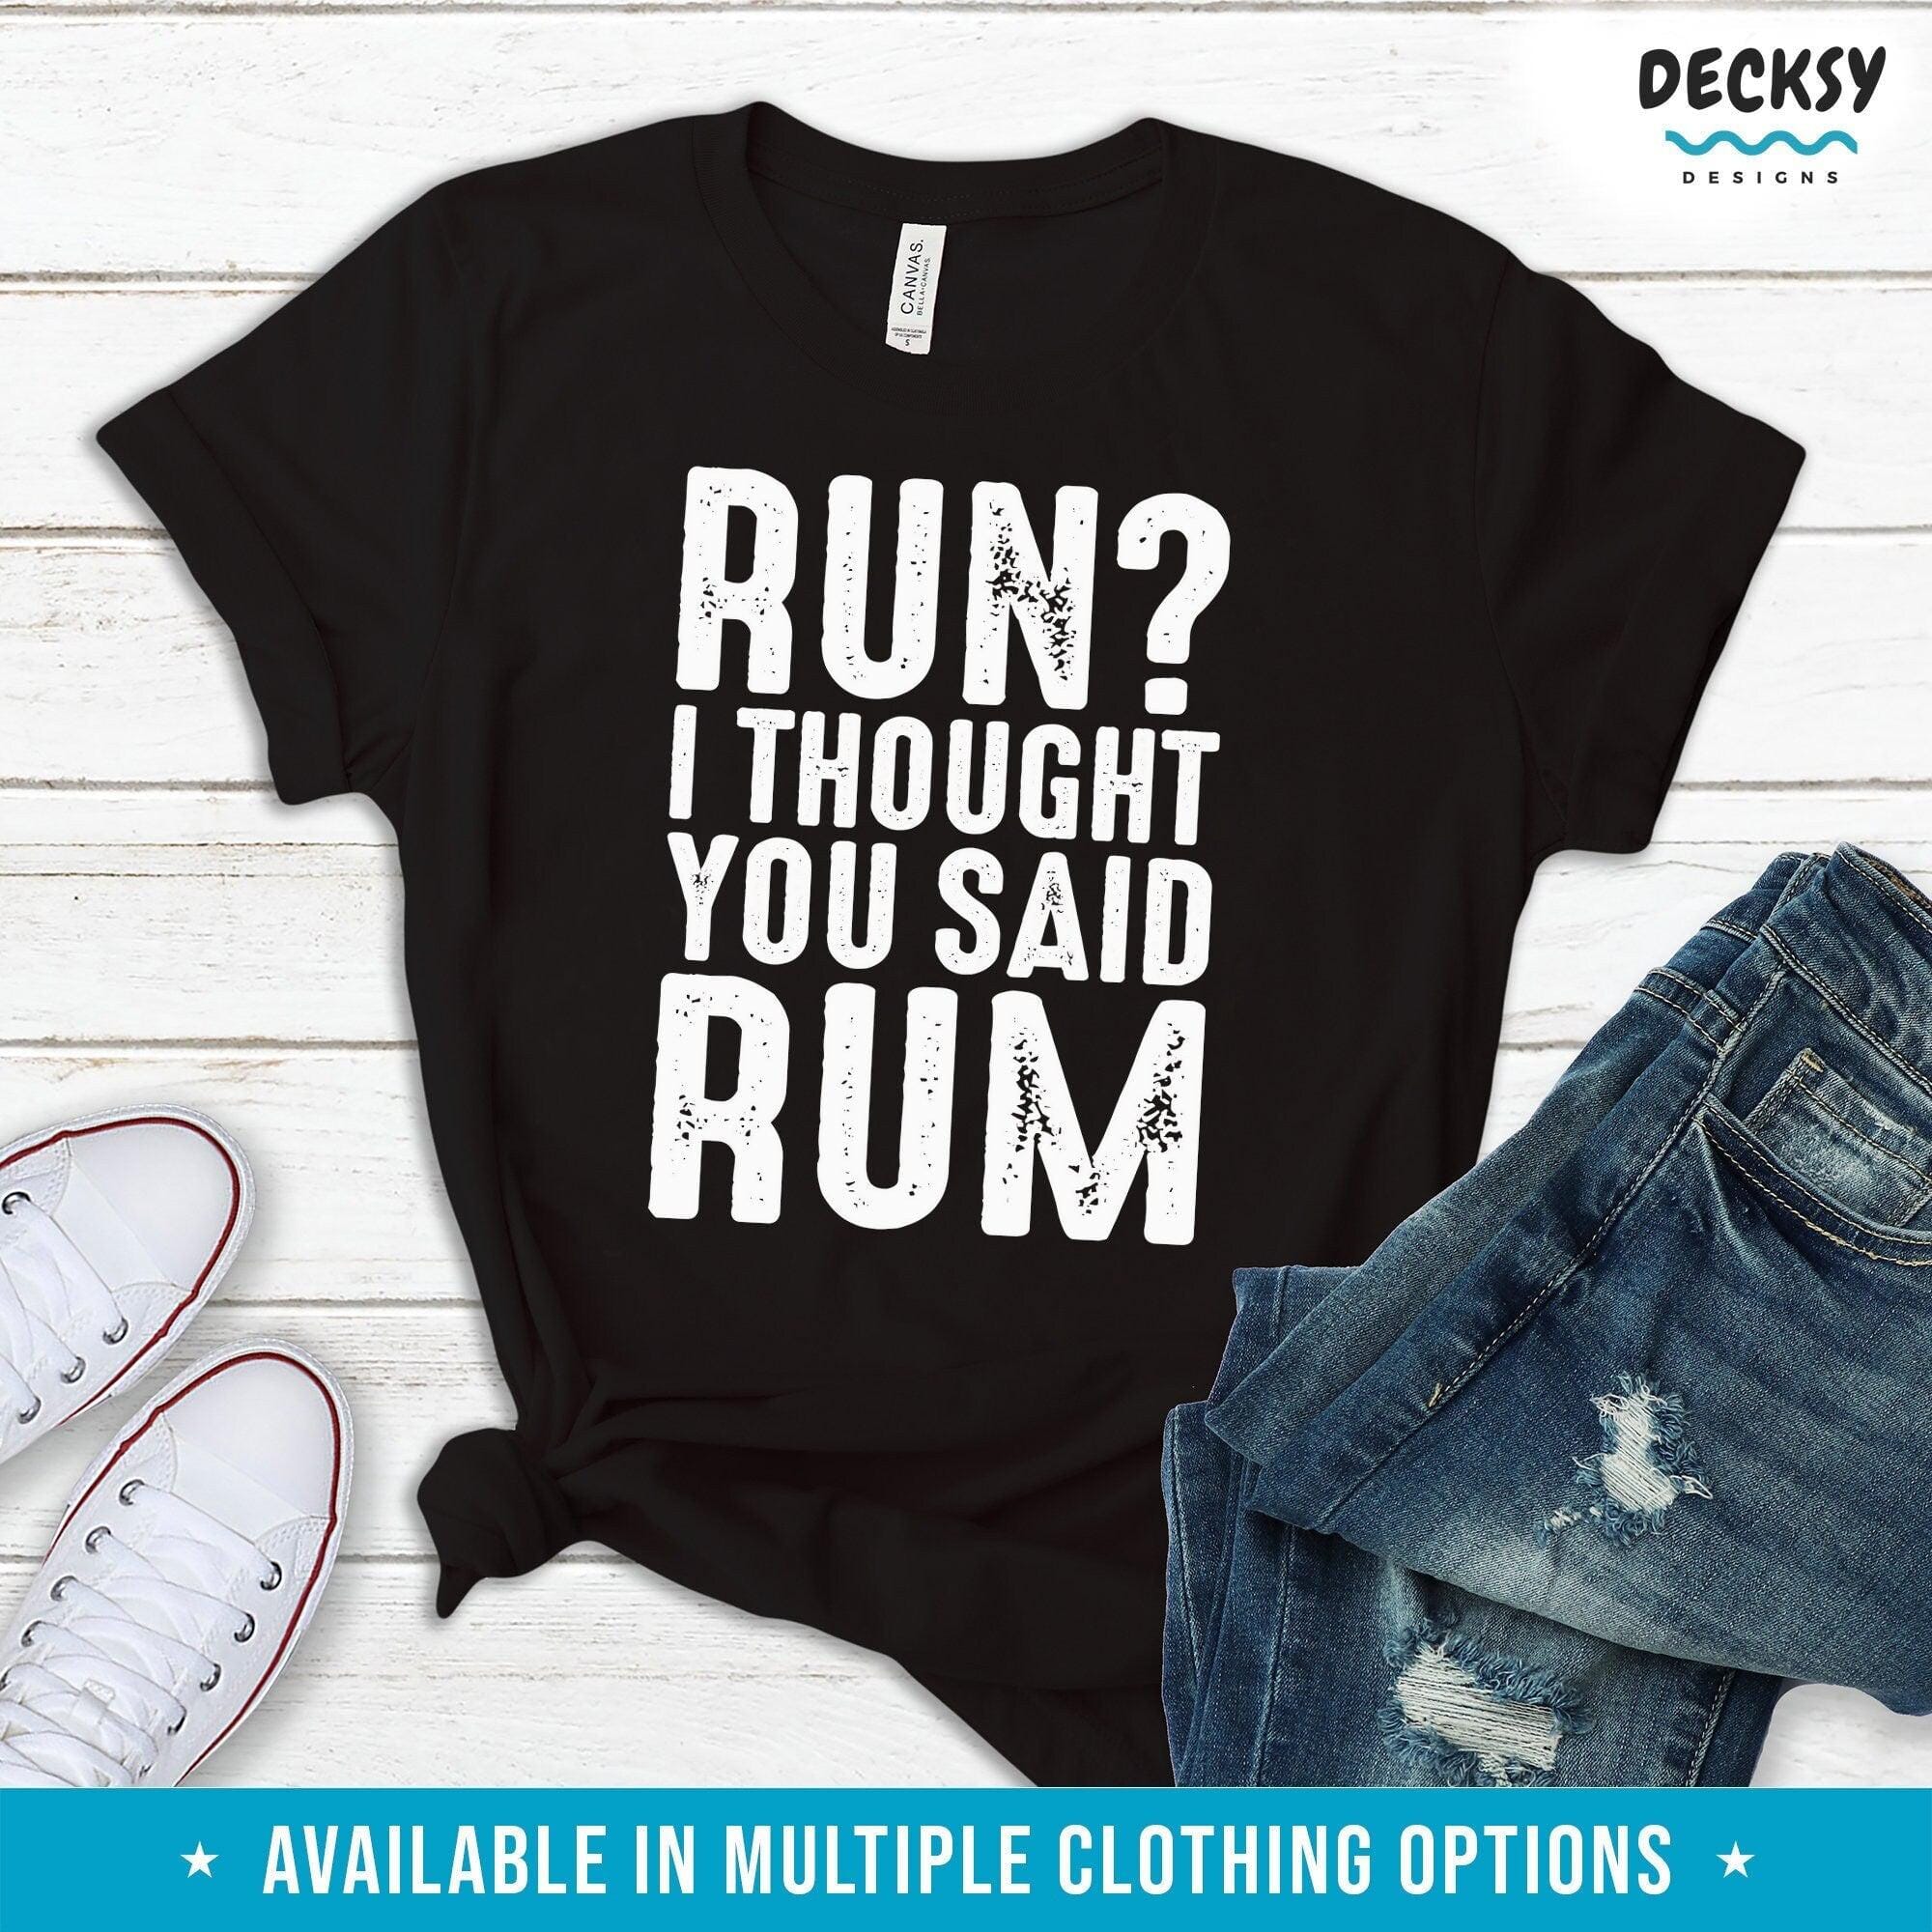 Running Shirt, Workout Gift-Clothing:Gender-Neutral Adult Clothing:Tops & Tees:T-shirts:Graphic Tees-DecksyDesigns